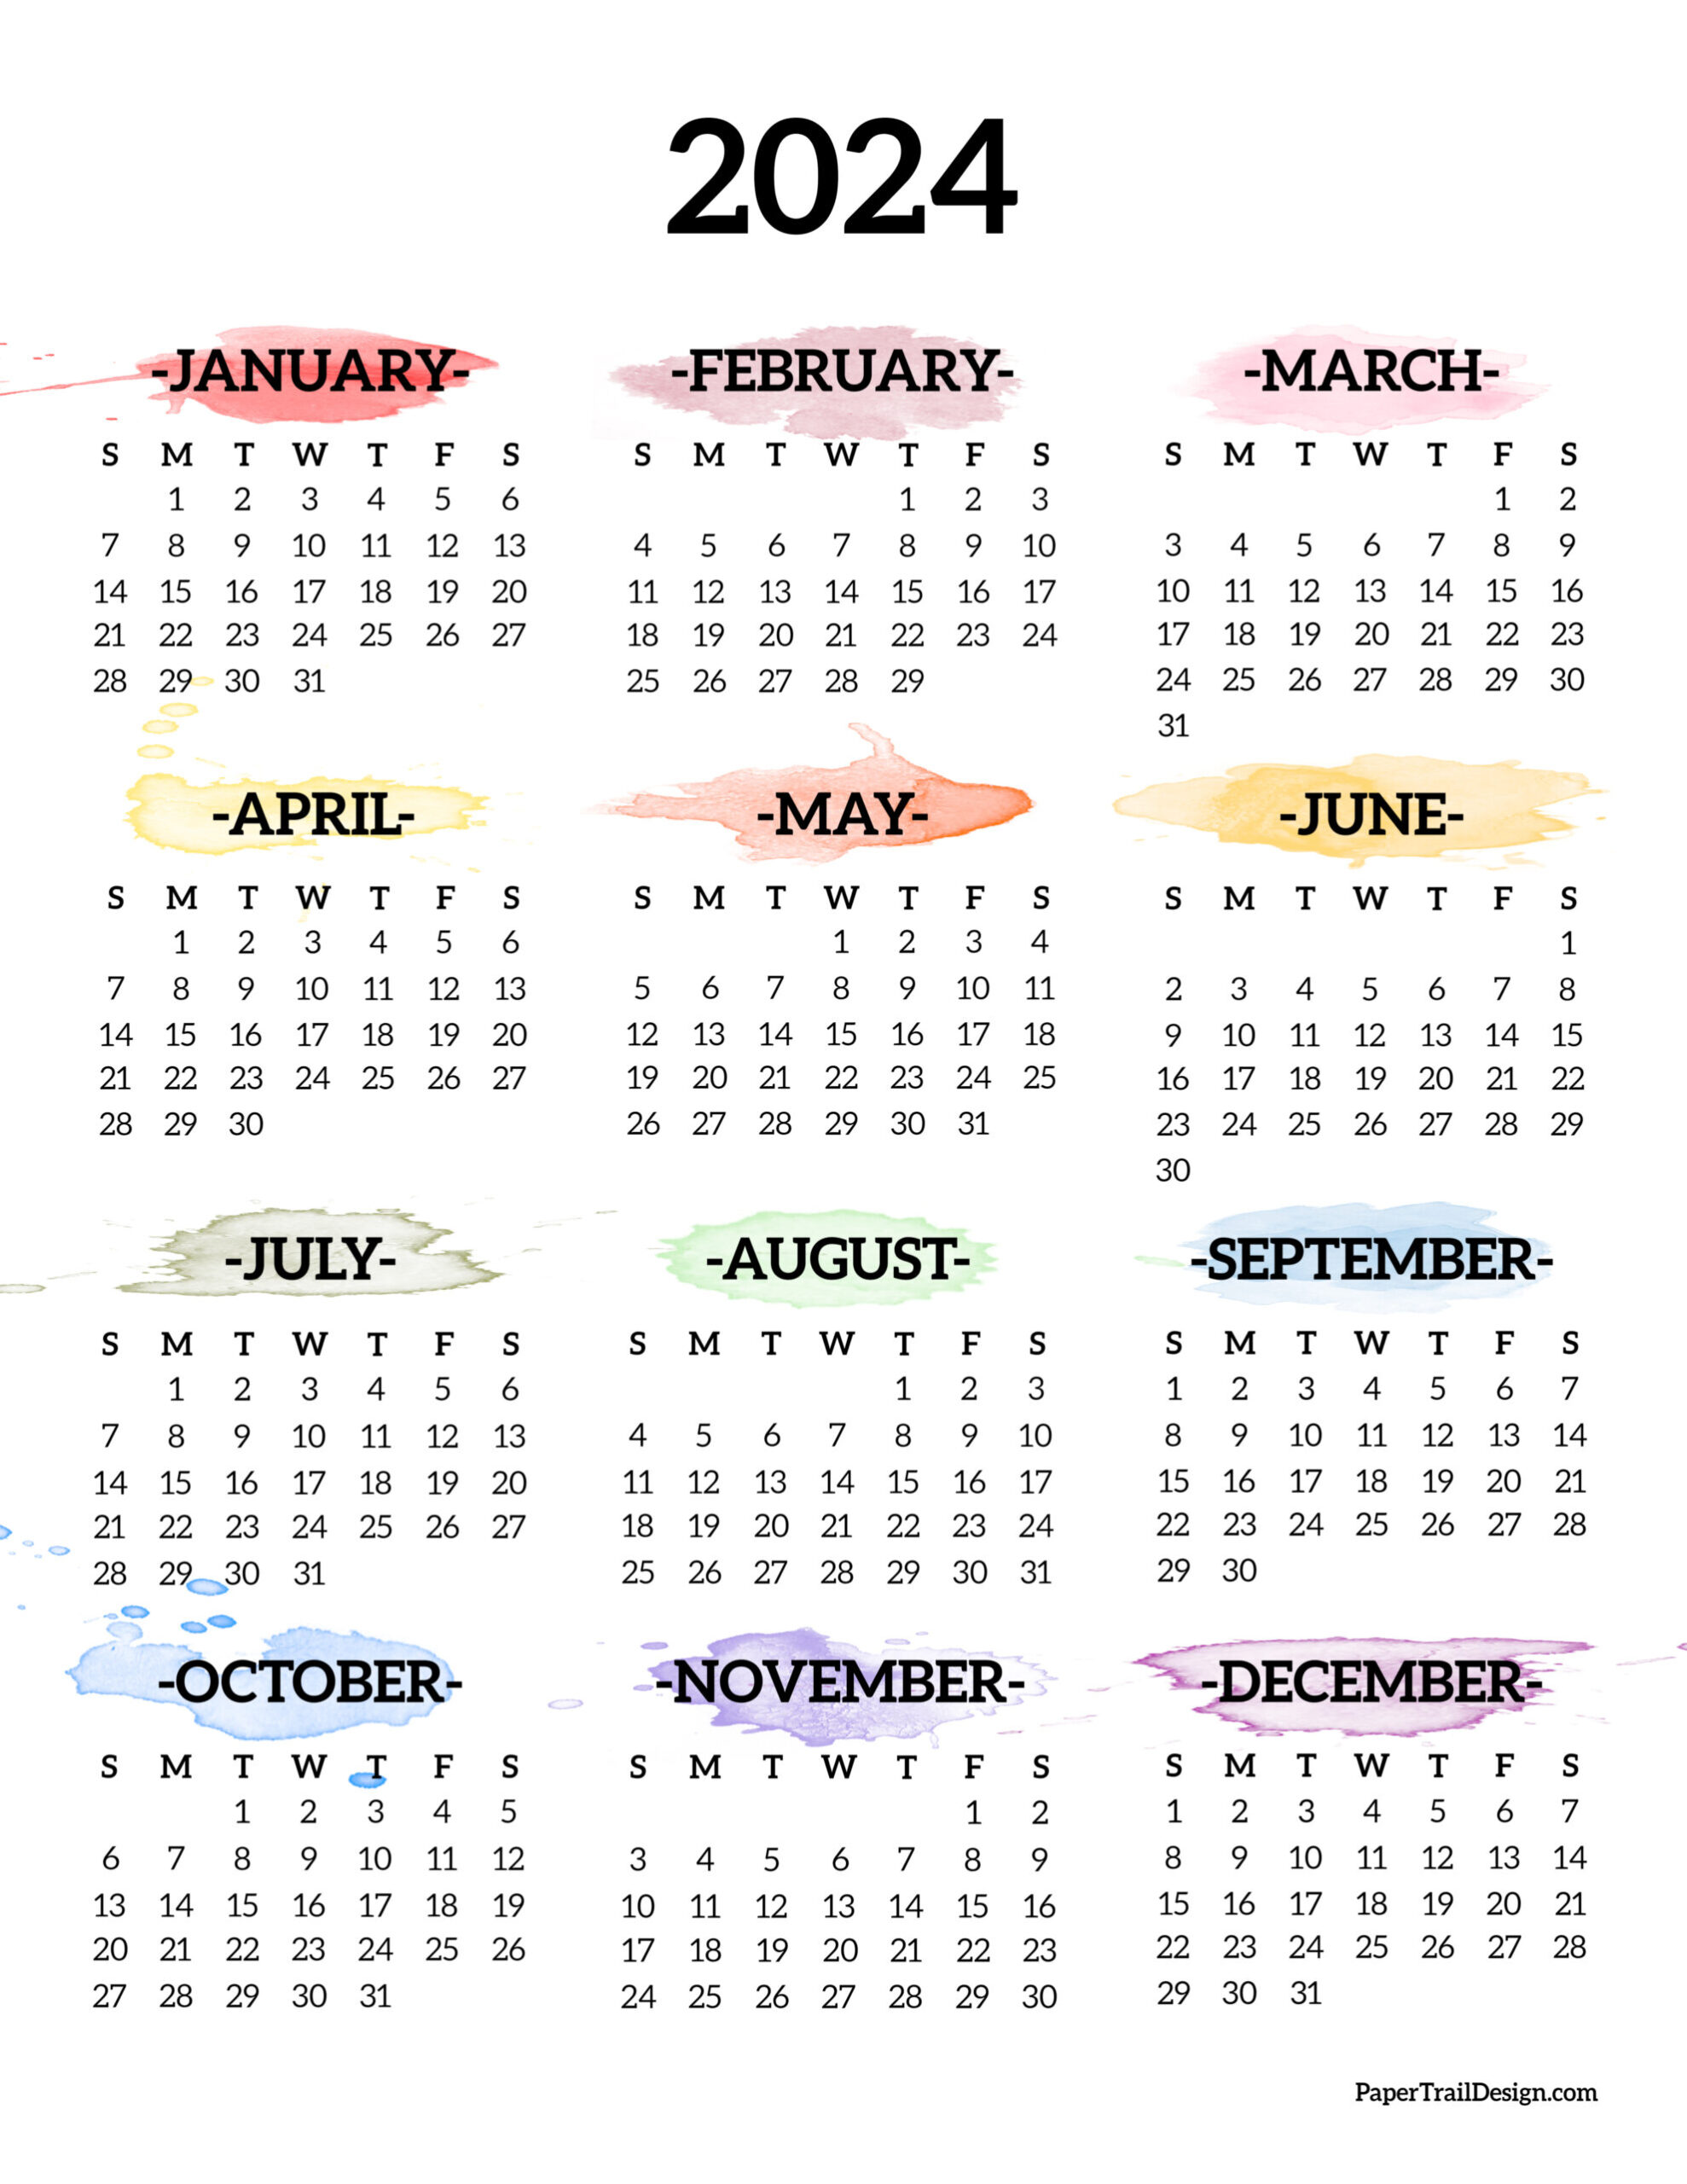 Calendar 2024 Printable One Page - Paper Trail Design for Month At A Glance Calendar 2024 Printable